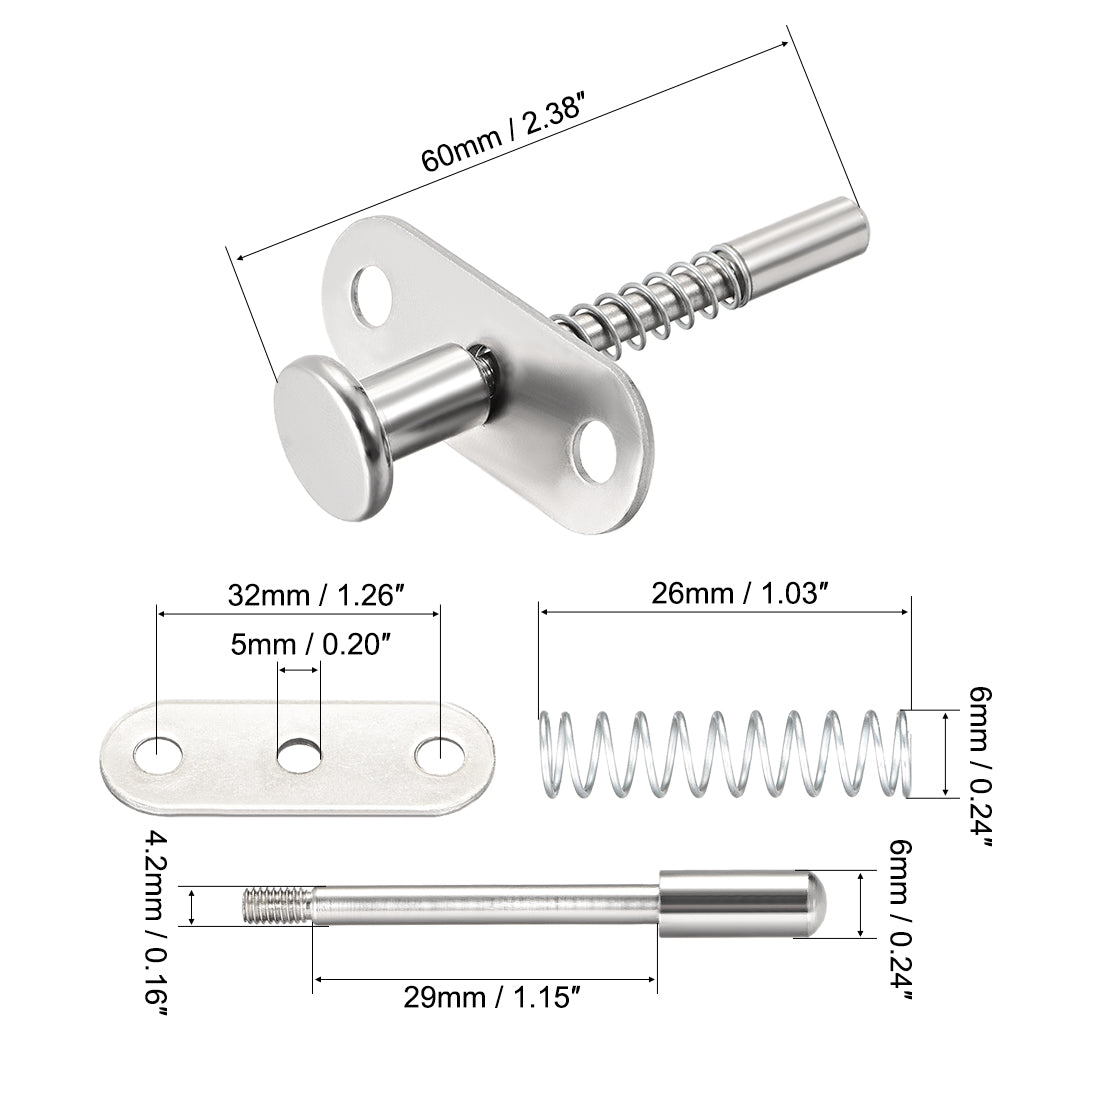 uxcell Uxcell Plunger Latches Spring-loaded Stainless Steel 6mm Dia Head 6mm Dia Spring 60mm Total Length , 2pcs